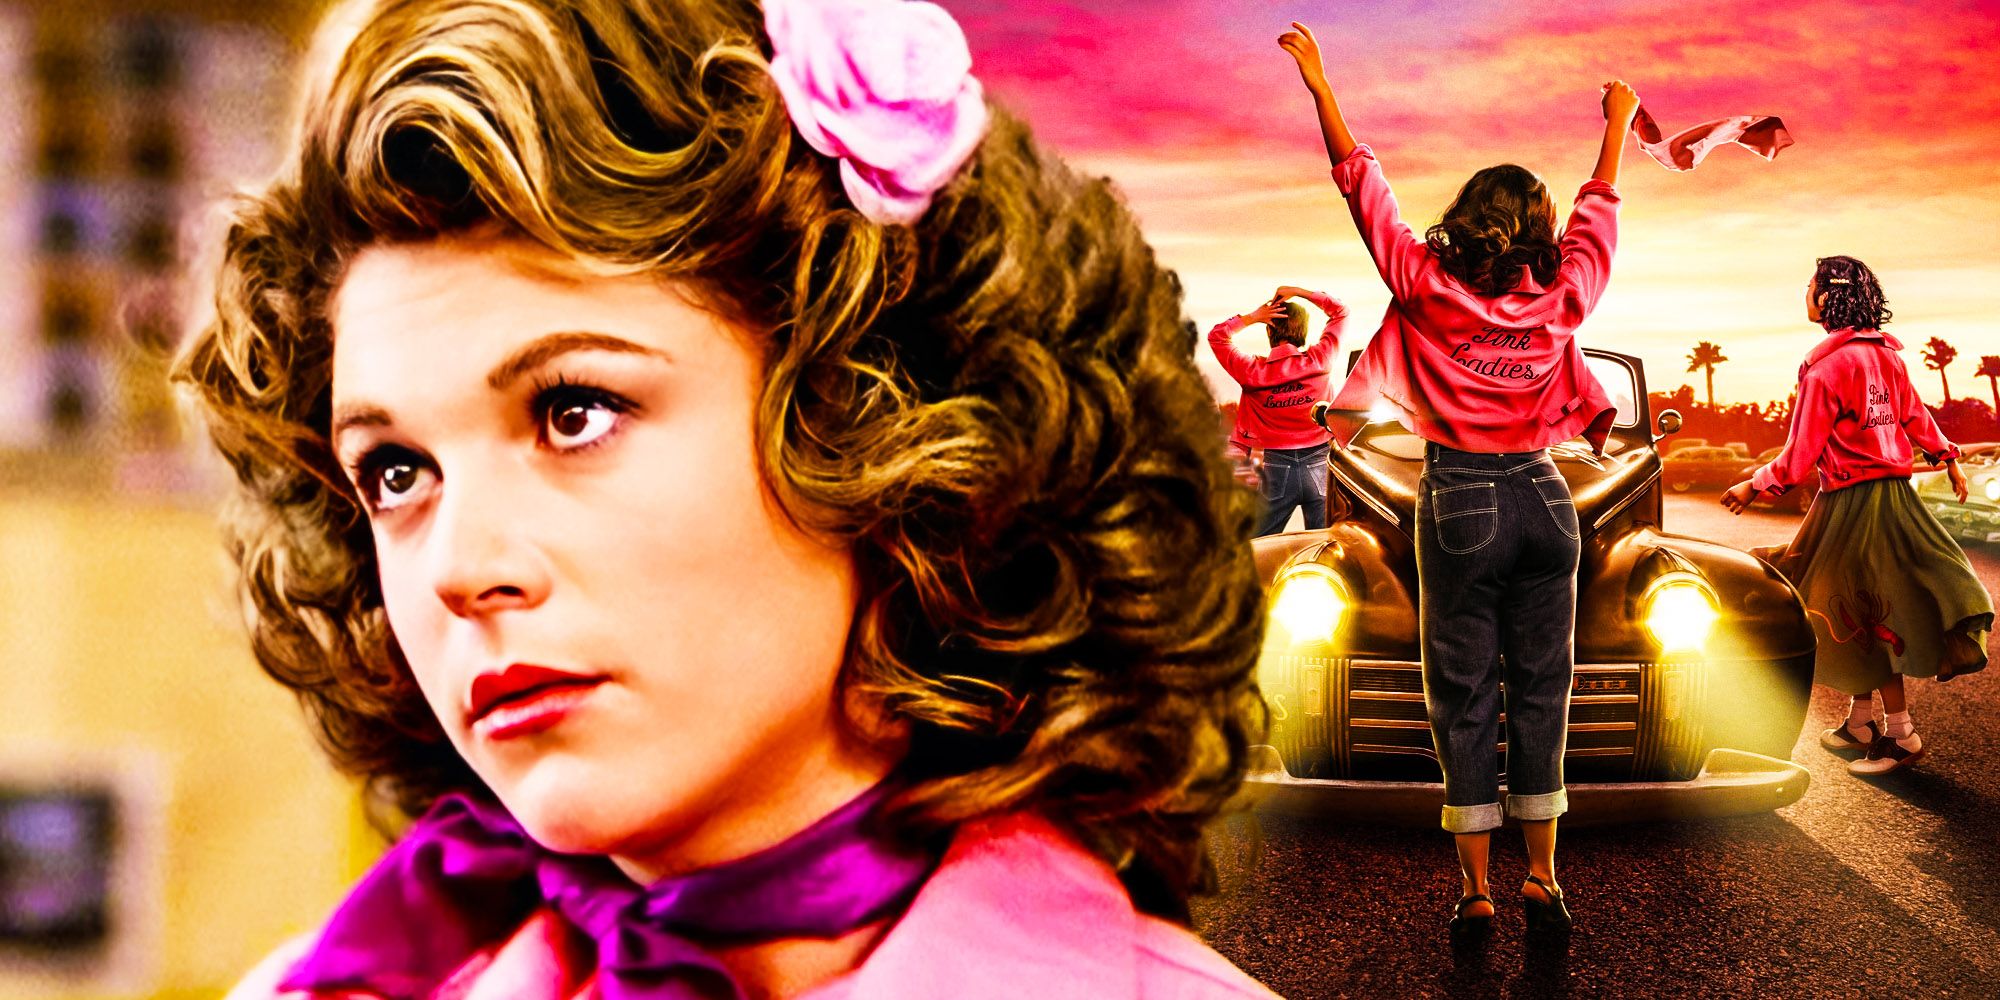 Grease: Live' Girls Reveal Three Ways To Know if You're a Pink